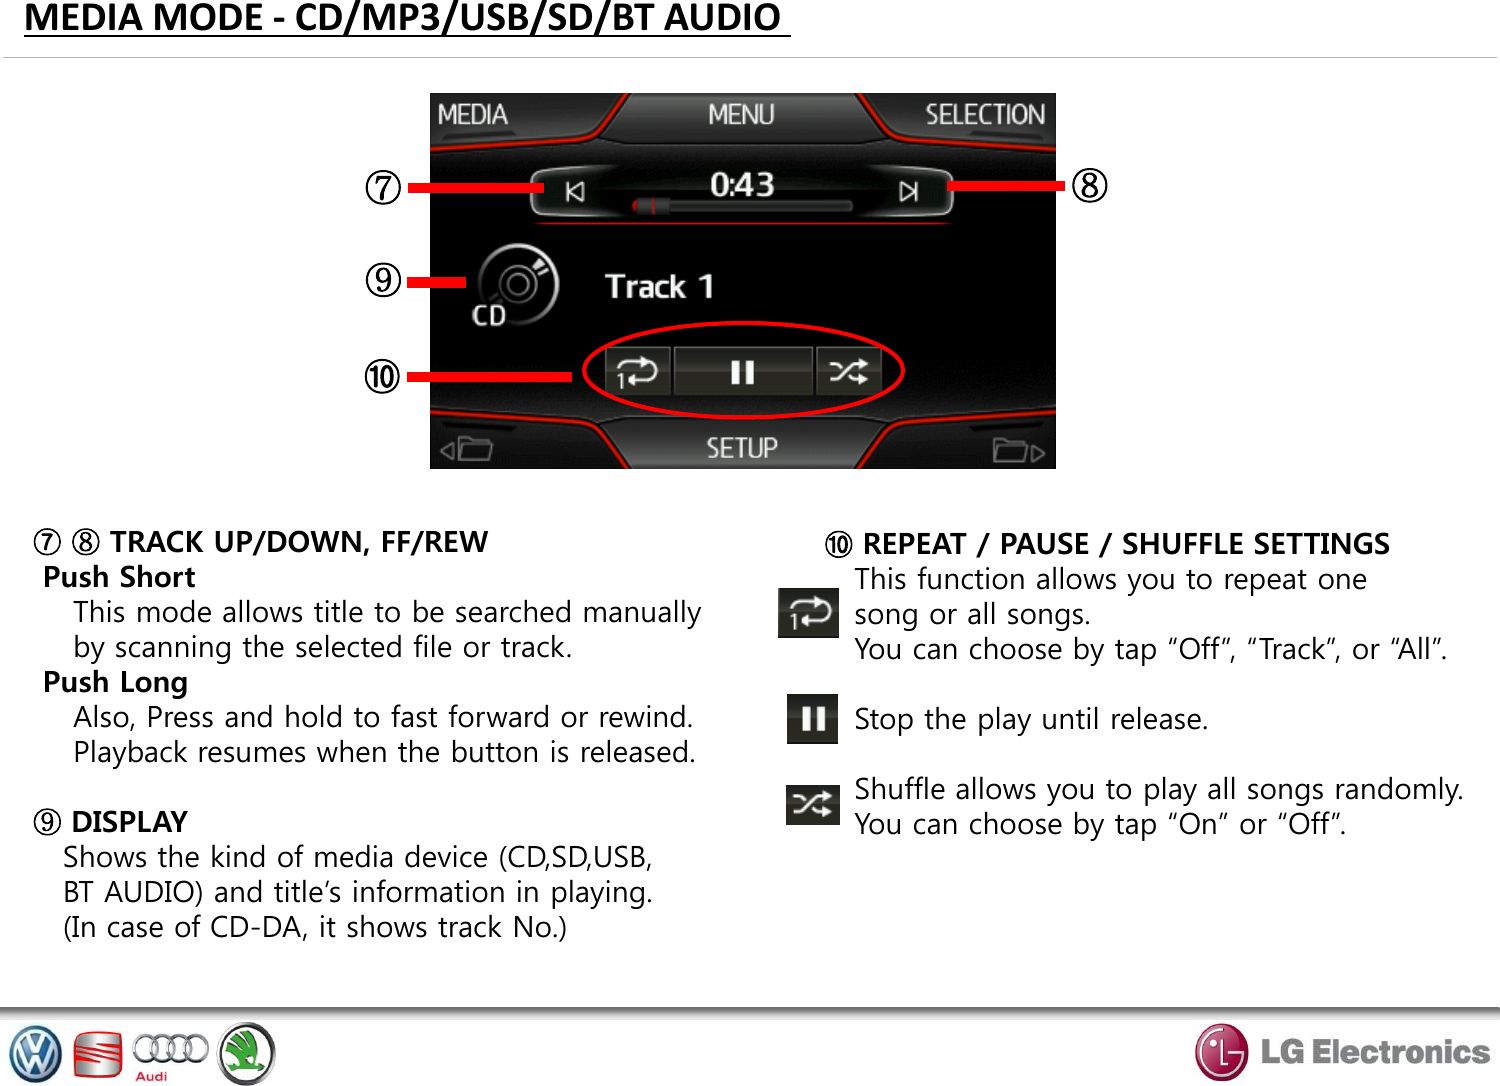 MEDIA MODE - CD/MP3/USB/SD/BT AUDIO  ⑨ ⑦ ⑧ ⑦ ⑧ TRACK UP/DOWN, FF/REW    Push Short     This mode allows title to be searched manually     by scanning the selected file or track.  Push Long     Also, Press and hold to fast forward or rewind.     Playback resumes when the button is released.  ⑨ DISPLAY    Shows the kind of media device (CD,SD,USB,    BT AUDIO) and title’s information in playing.    (In case of CD-DA, it shows track No.) ⑩  ⑩ REPEAT / PAUSE / SHUFFLE SETTINGS    This function allows you to repeat one    song or all songs.    You can choose by tap “Off”, “Track”, or “All”.     Stop the play until release.     Shuffle allows you to play all songs randomly.    You can choose by tap “On” or “Off”. 